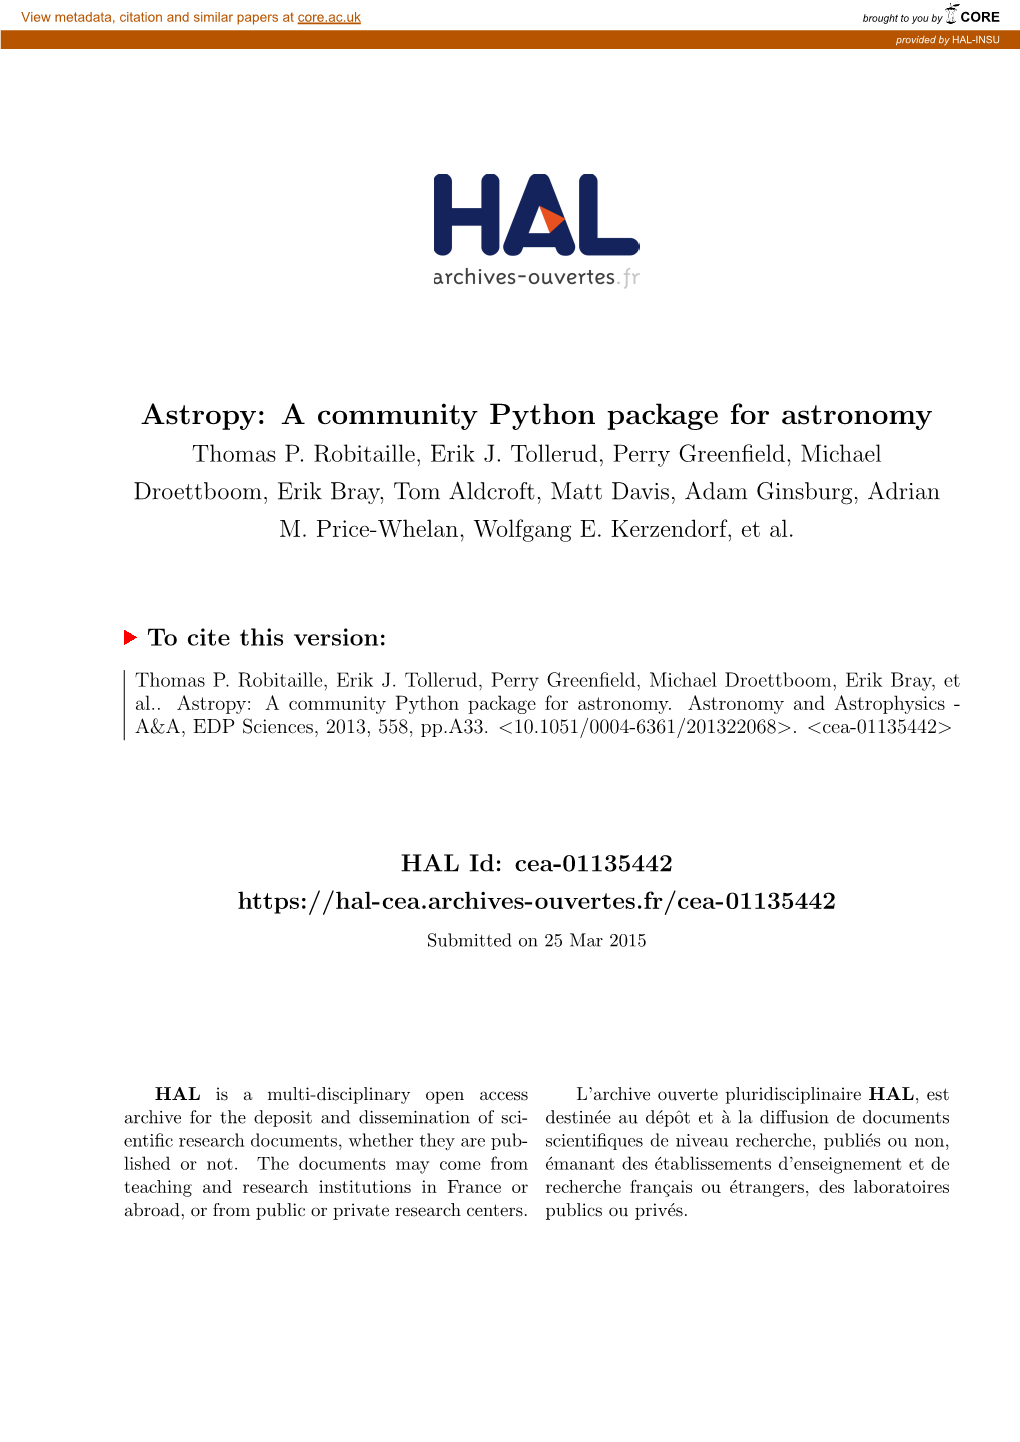 Astropy: a Community Python Package for Astronomy Thomas P